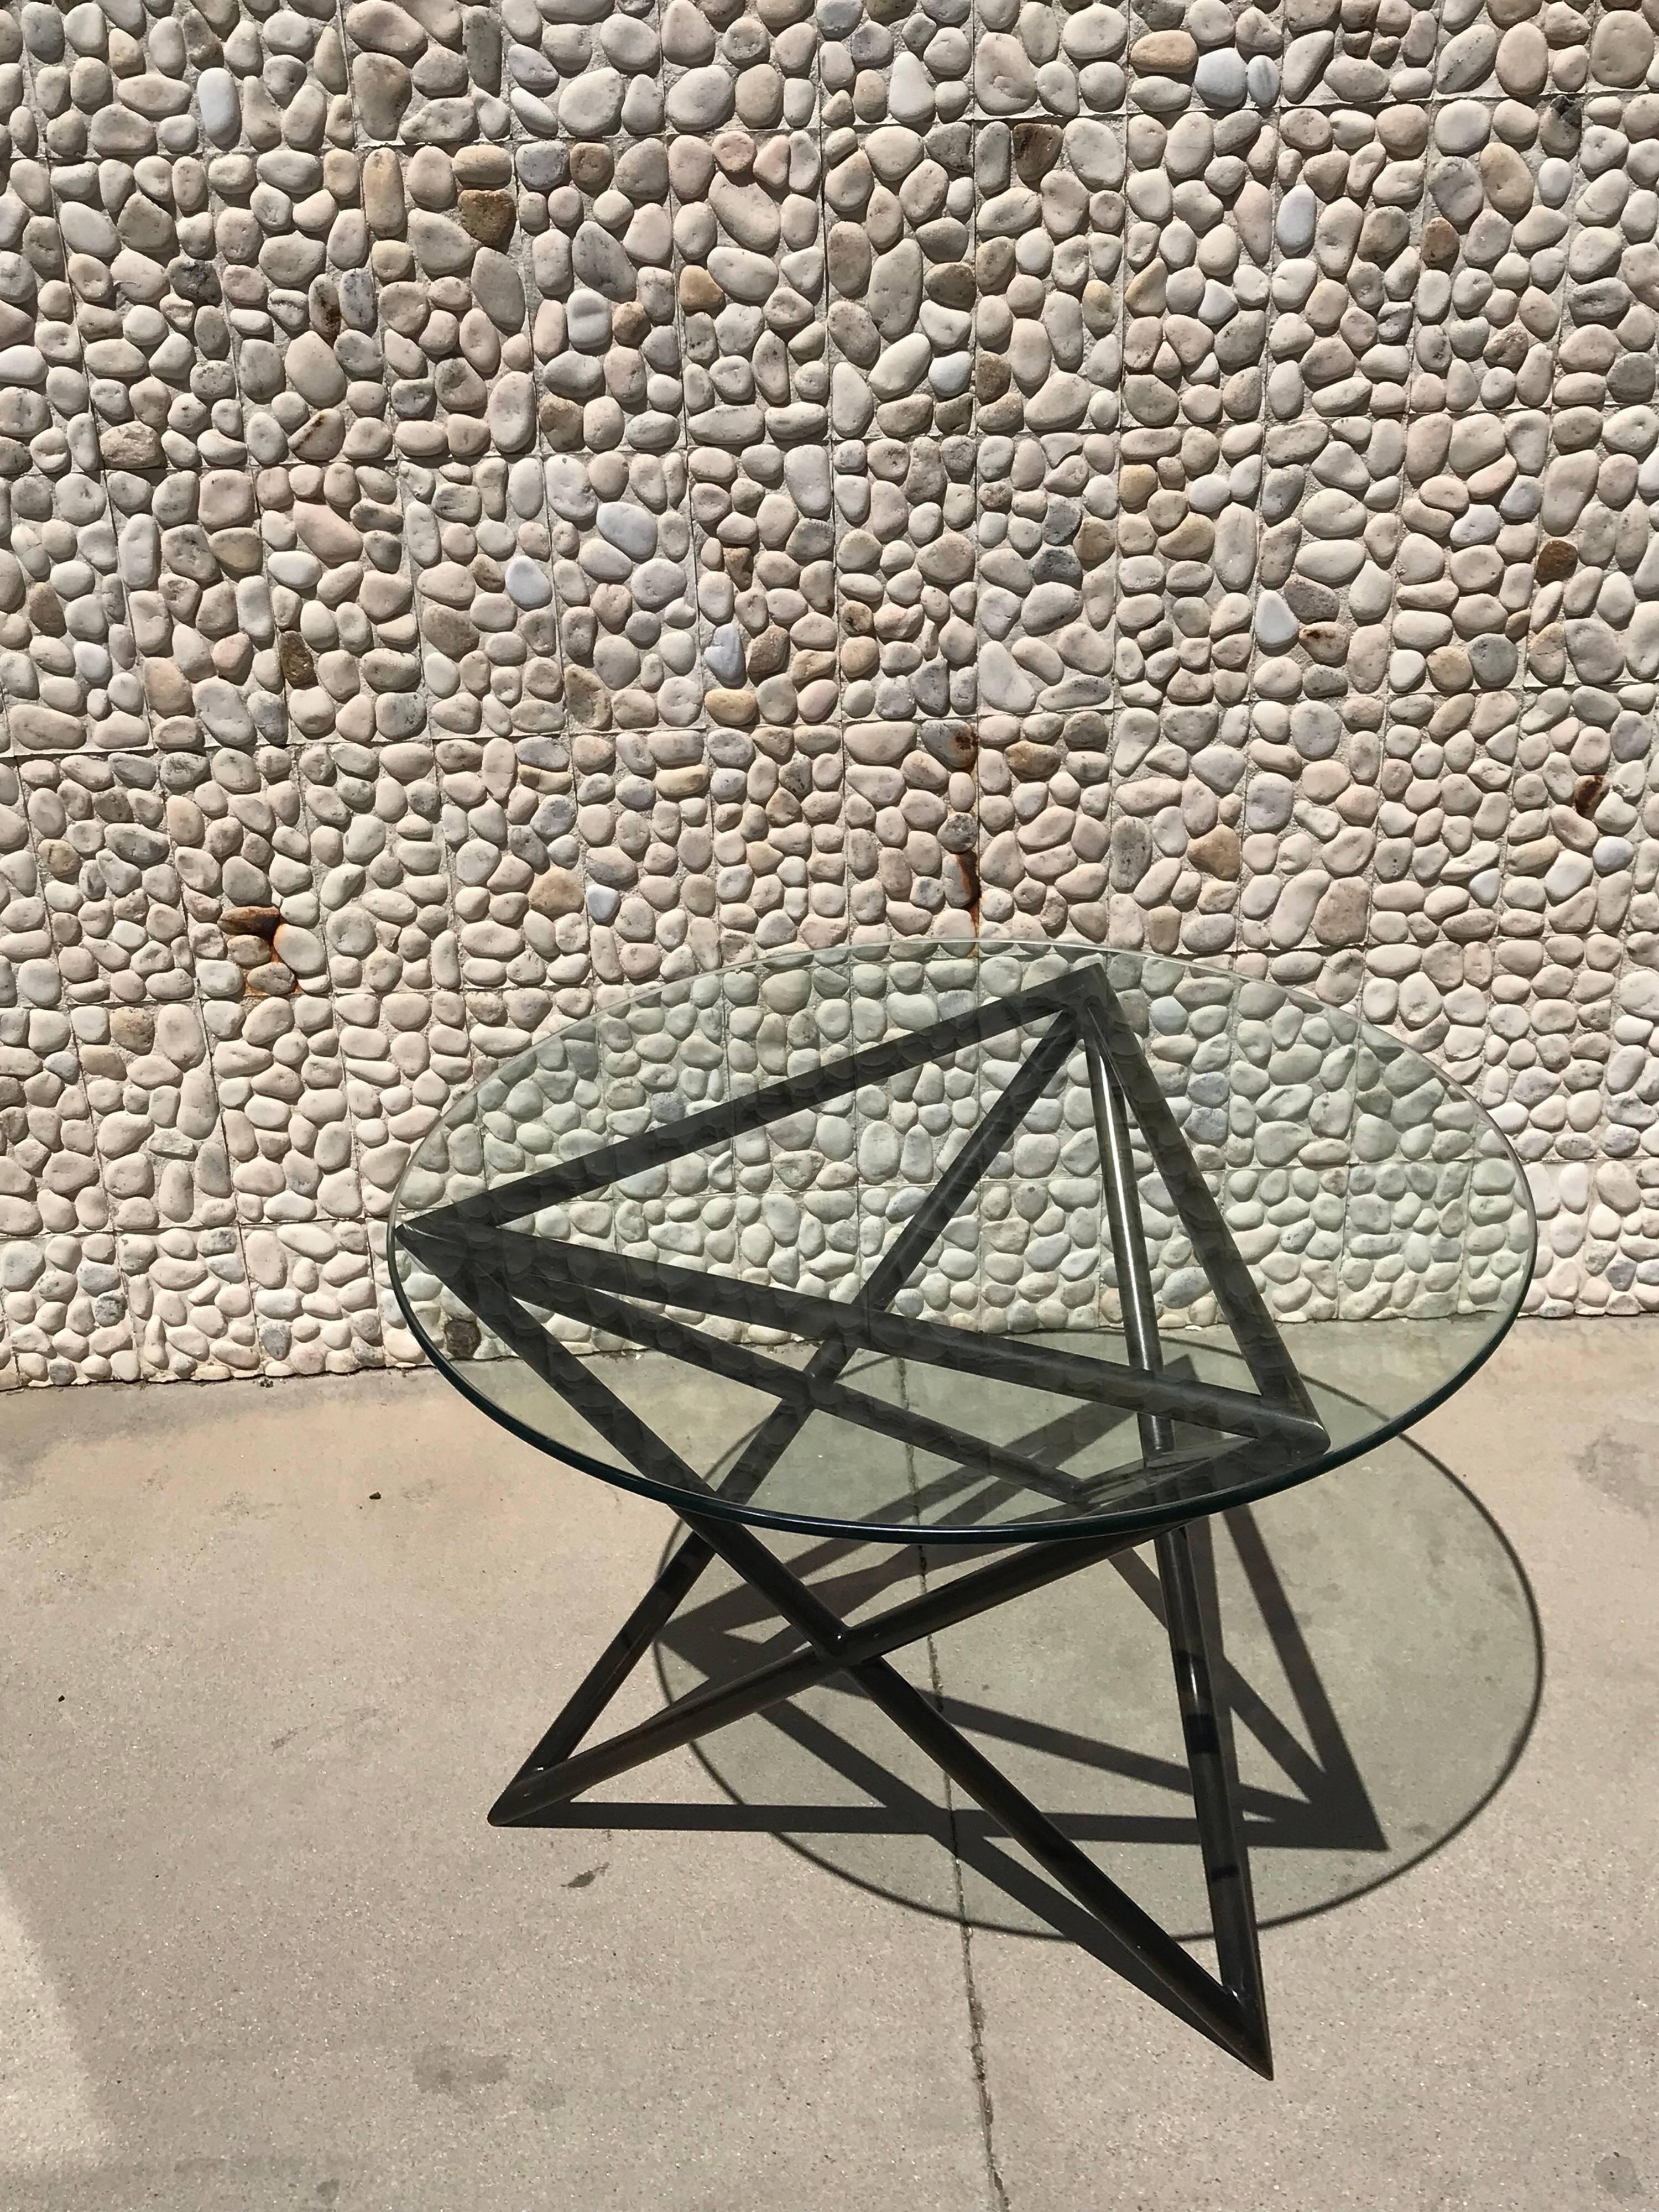 This gorgeous bronze table came from the same Steve Chase Estate as the gorgeous sofa on separate listing. Do not know if it is real bronze or high end bronze finish. Original glass top. Looks like an abstract work of art.

Known for their